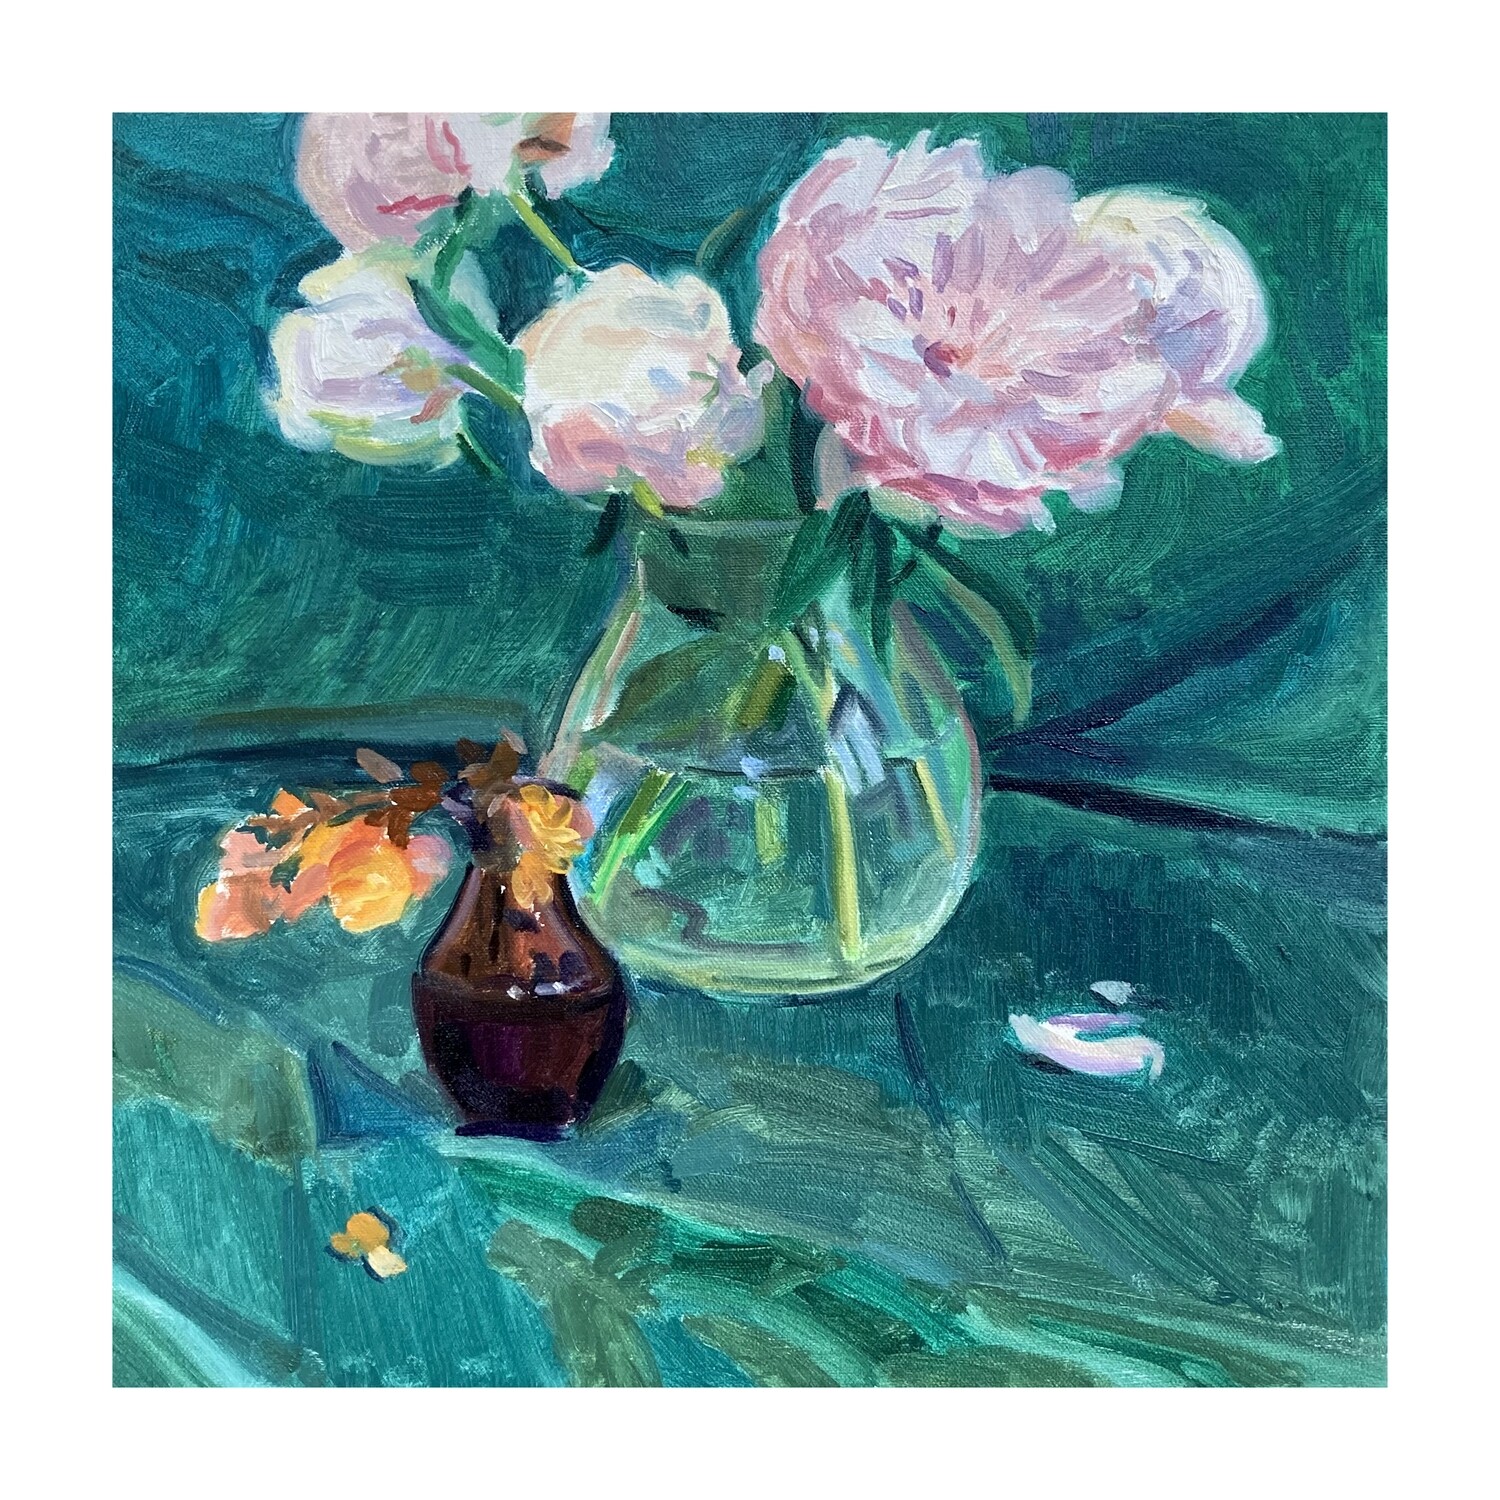 Peonies and Begonias   oil on canvas  16